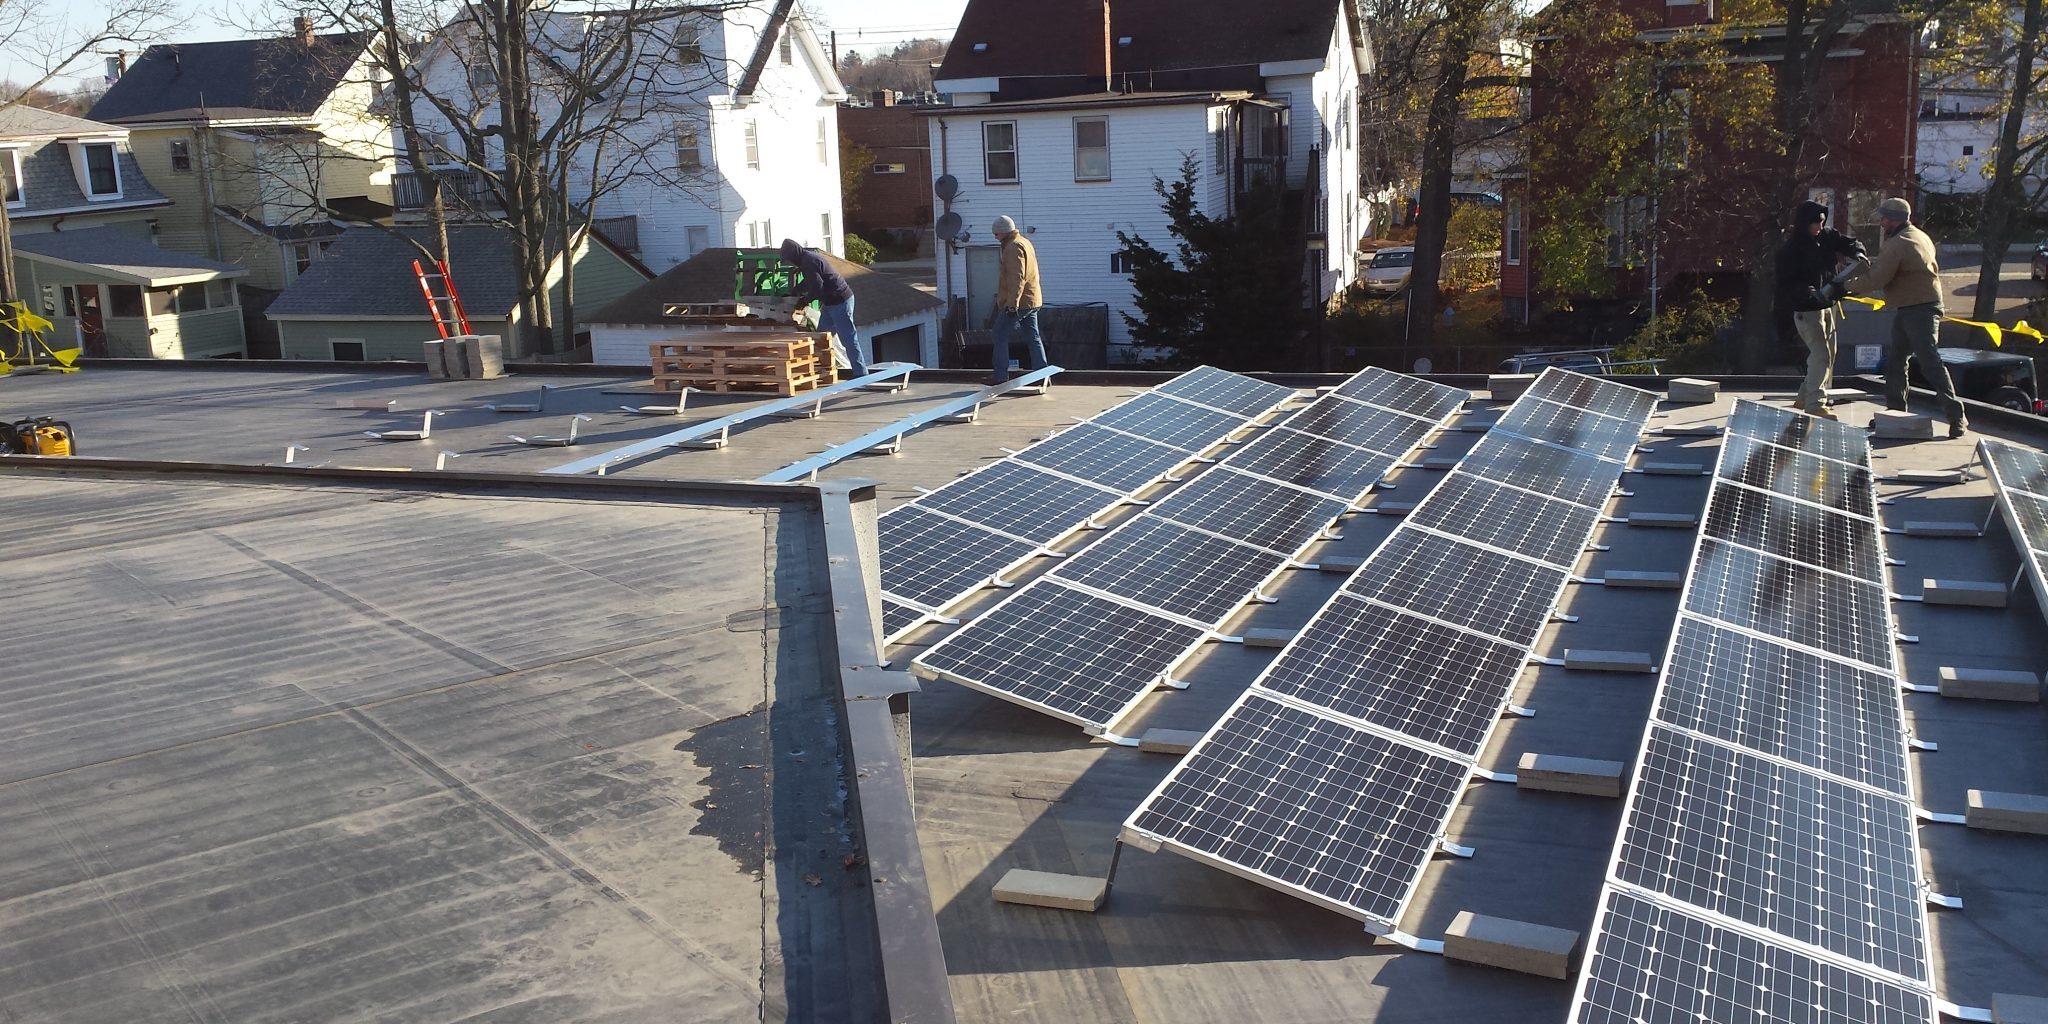 Image shows solar panels being installed on a large roof